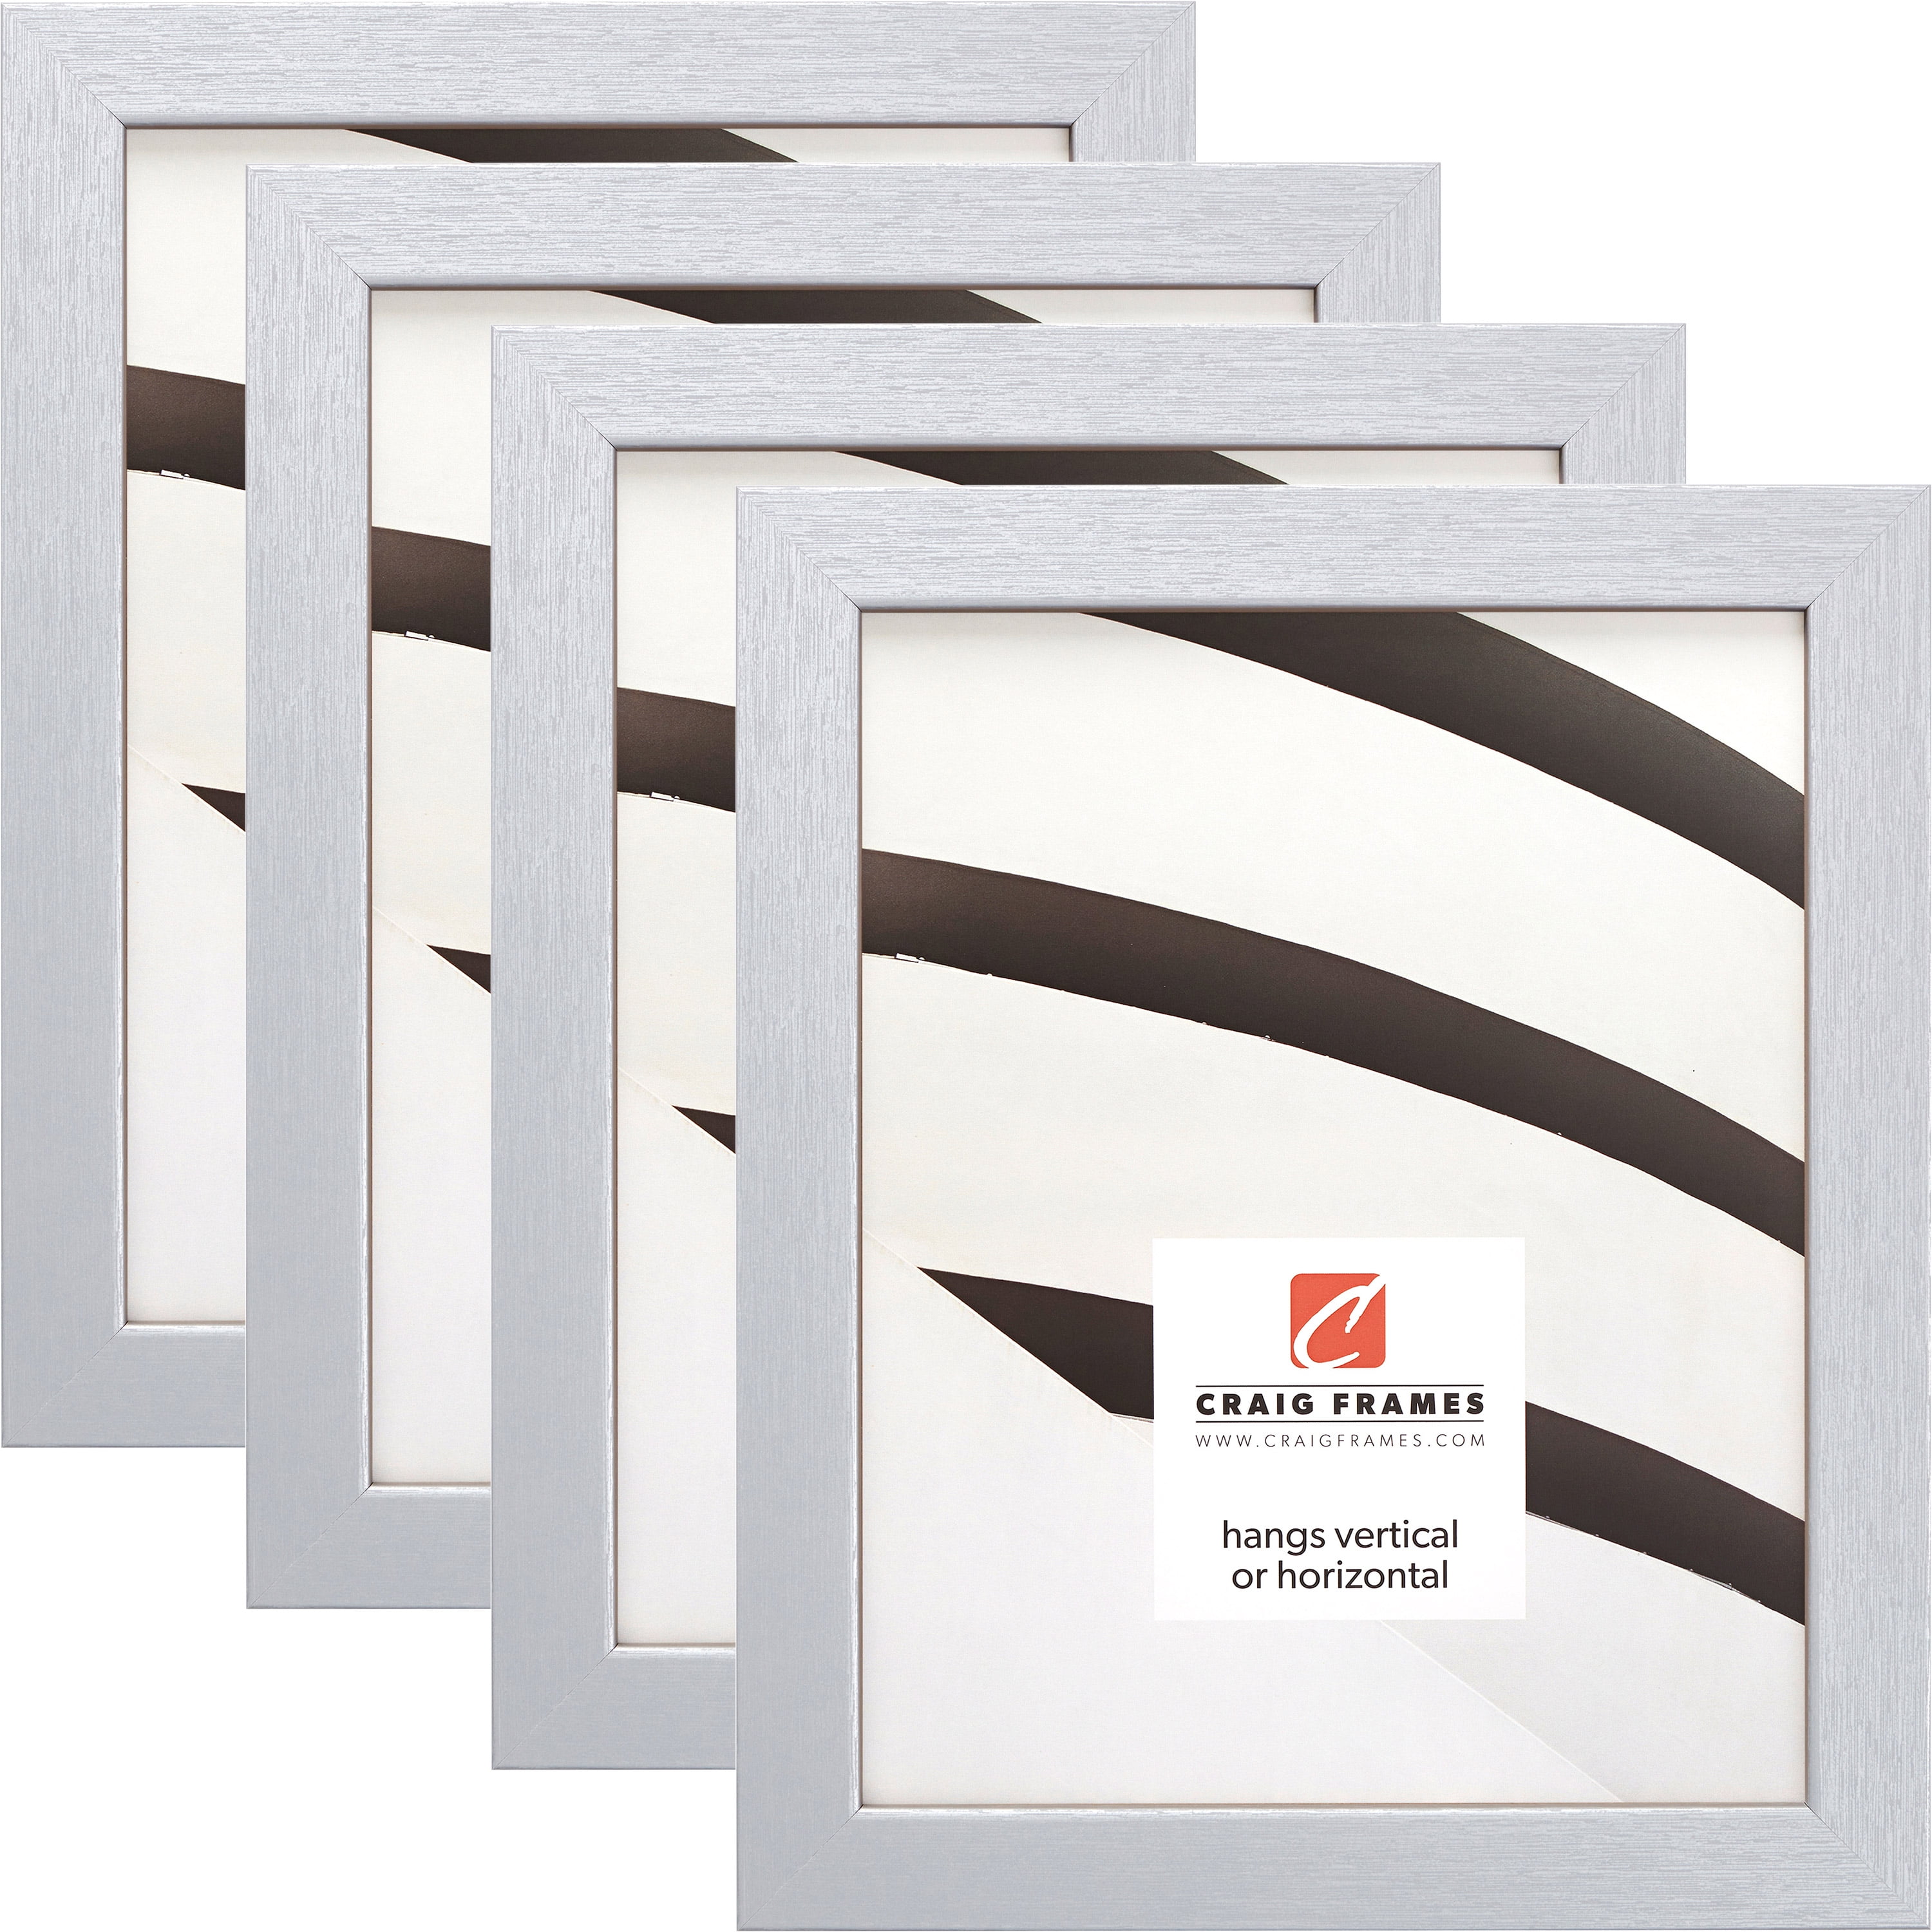 Details about   8.5x11 Black Gallery Certificate and Document Frame Includes... Wide Molding 